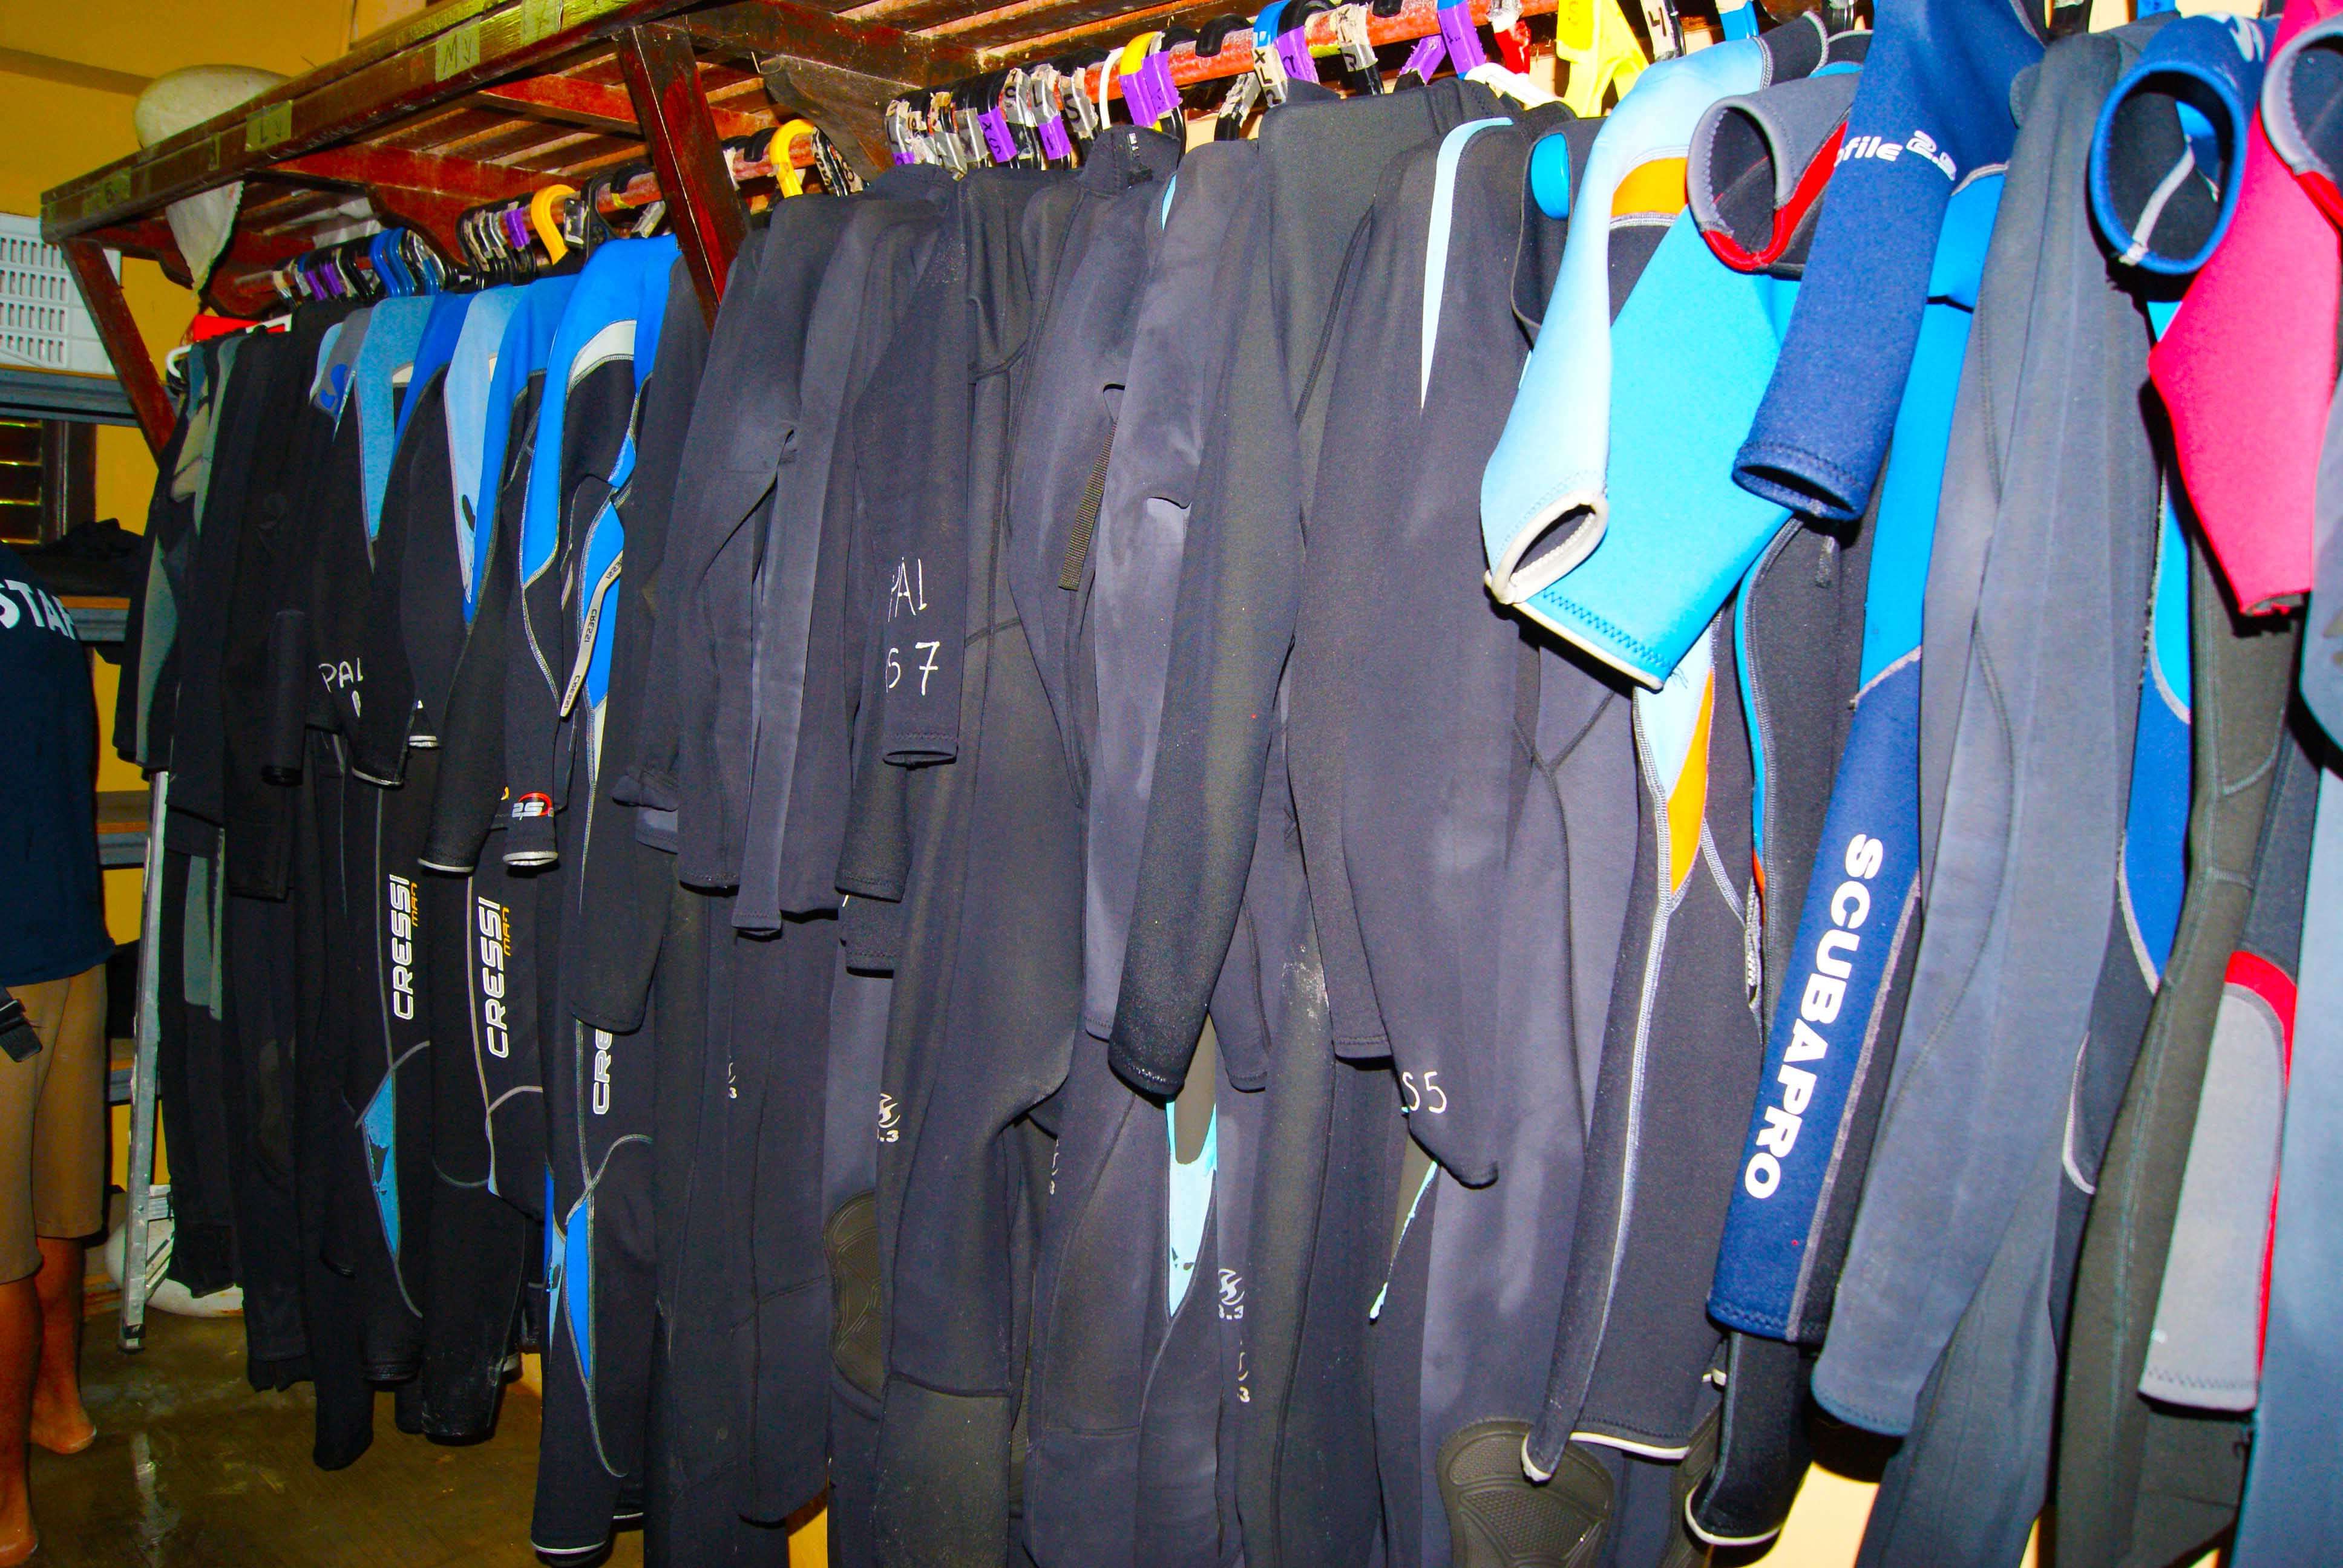 Wetsuits of different sizes, colors and tastes! In perfect conditions!